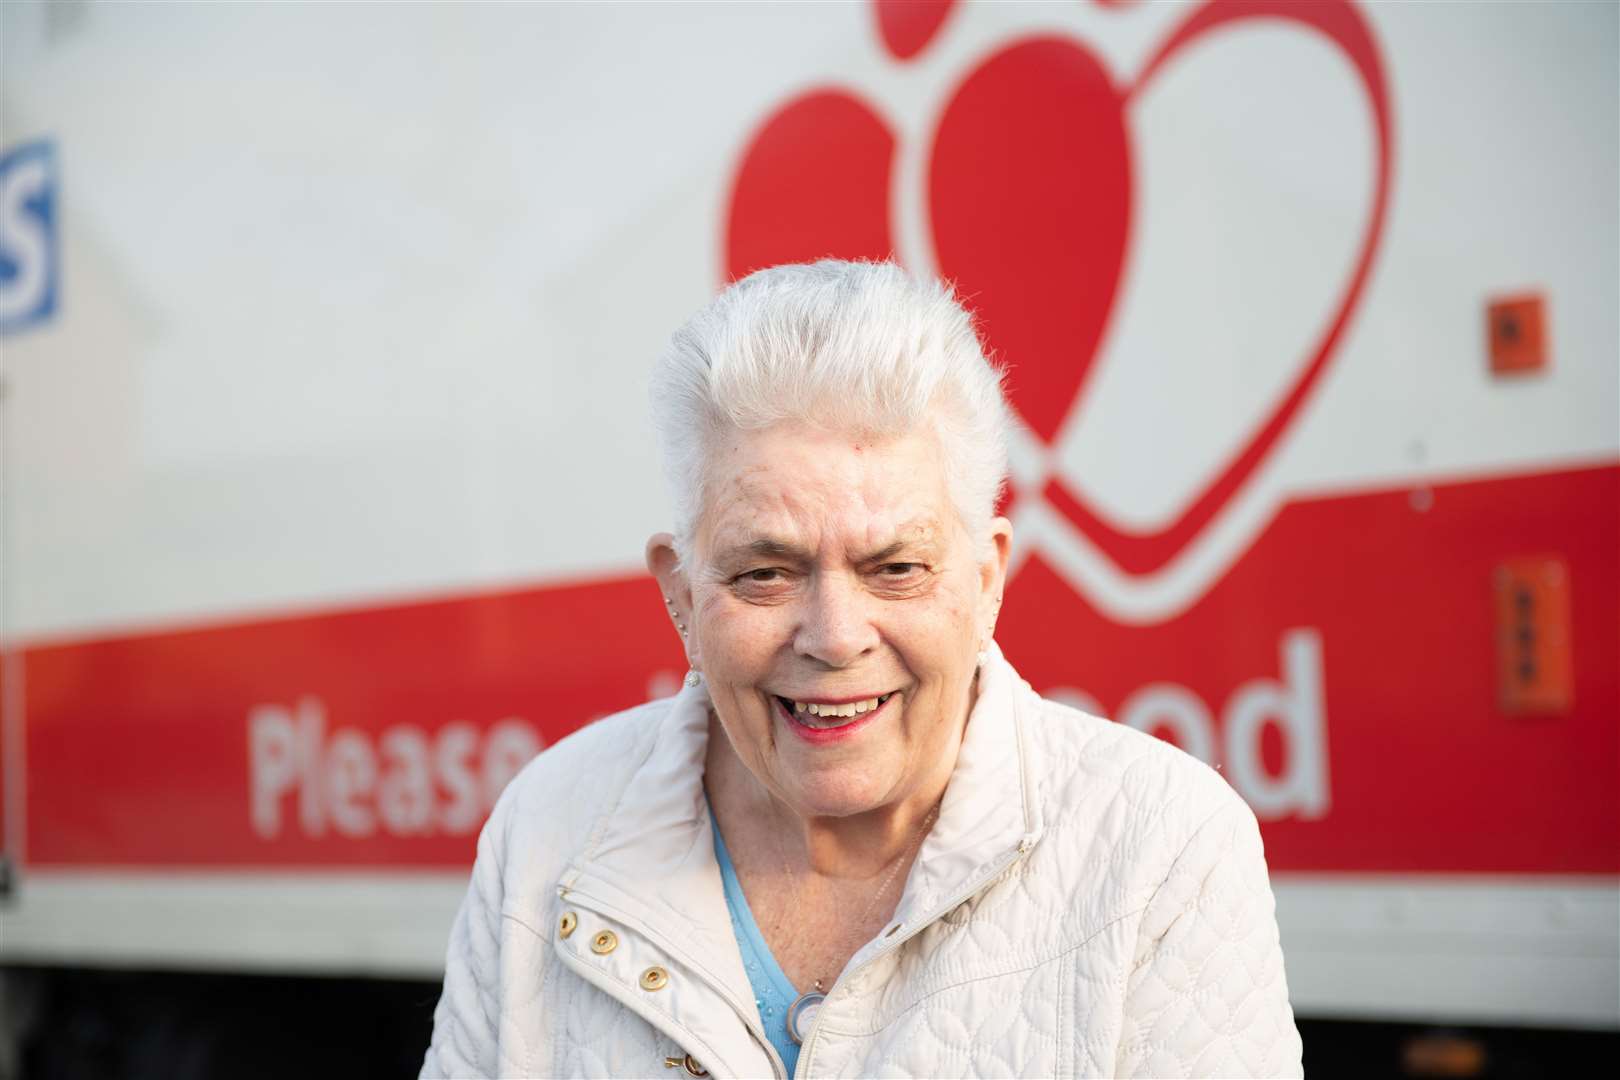 Christine Newnham is thought to be one of the longest serving blood donors in the country. Picture: SWNS